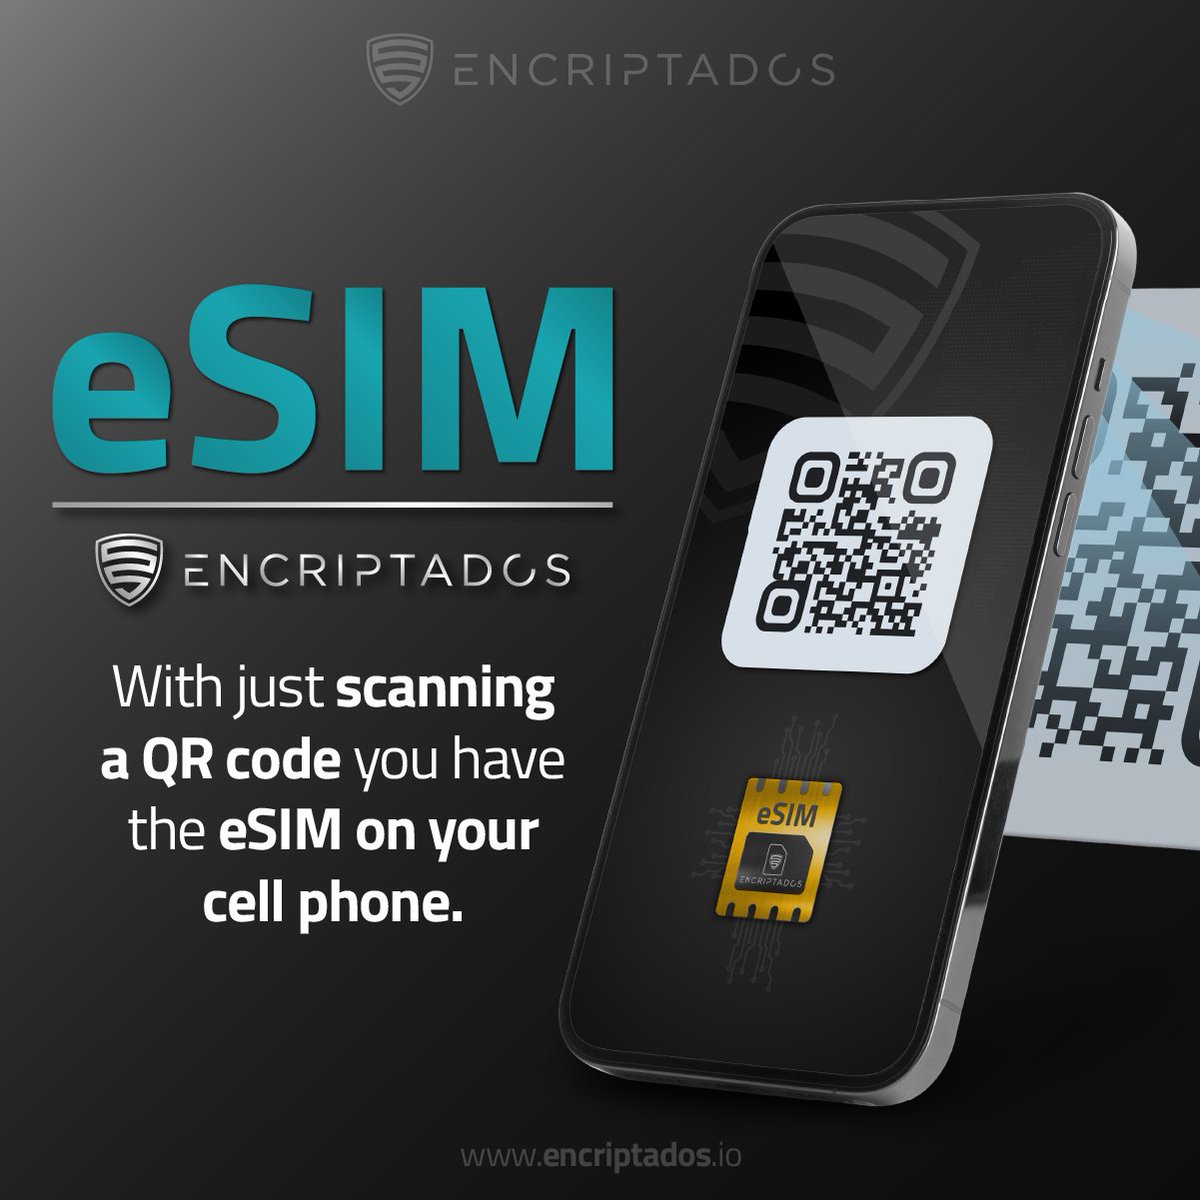 If you have a cell phone that supports eSIMs, just by scanning a QR code you can have it on your cell phone📲

It is activated immediately. No shipping required. ✅
Learn more about it at 
encriptados.io/en/pages/encry…

#Encriptados #SimCard #InternationalSim #Cybersecurity #Hacking